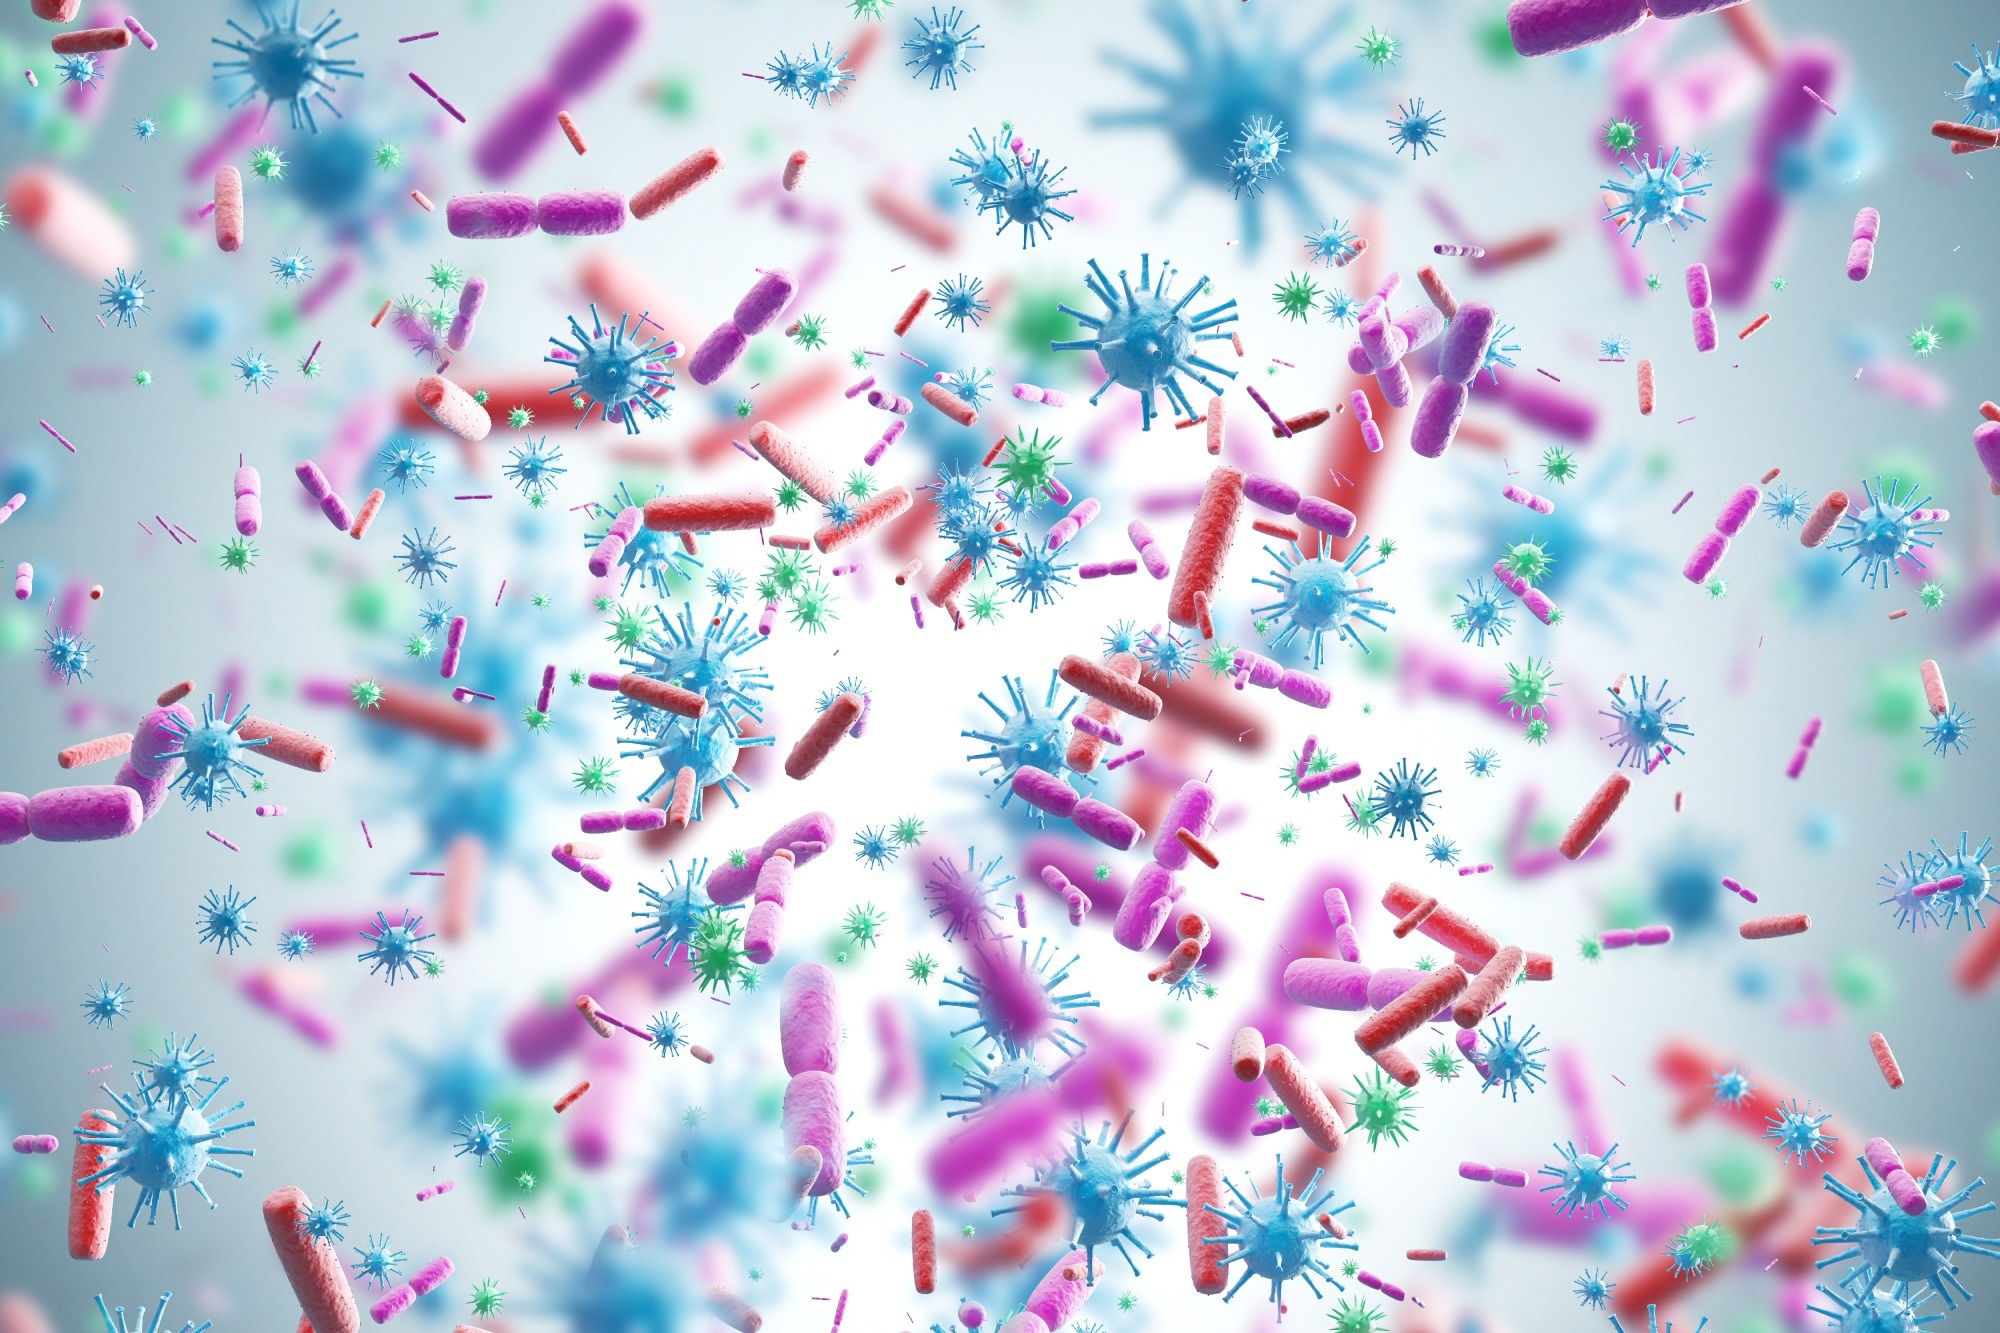 The germ theory revisited: A noncentric view on infection outcome. Image Credit: ImageFlow / Shutterstock